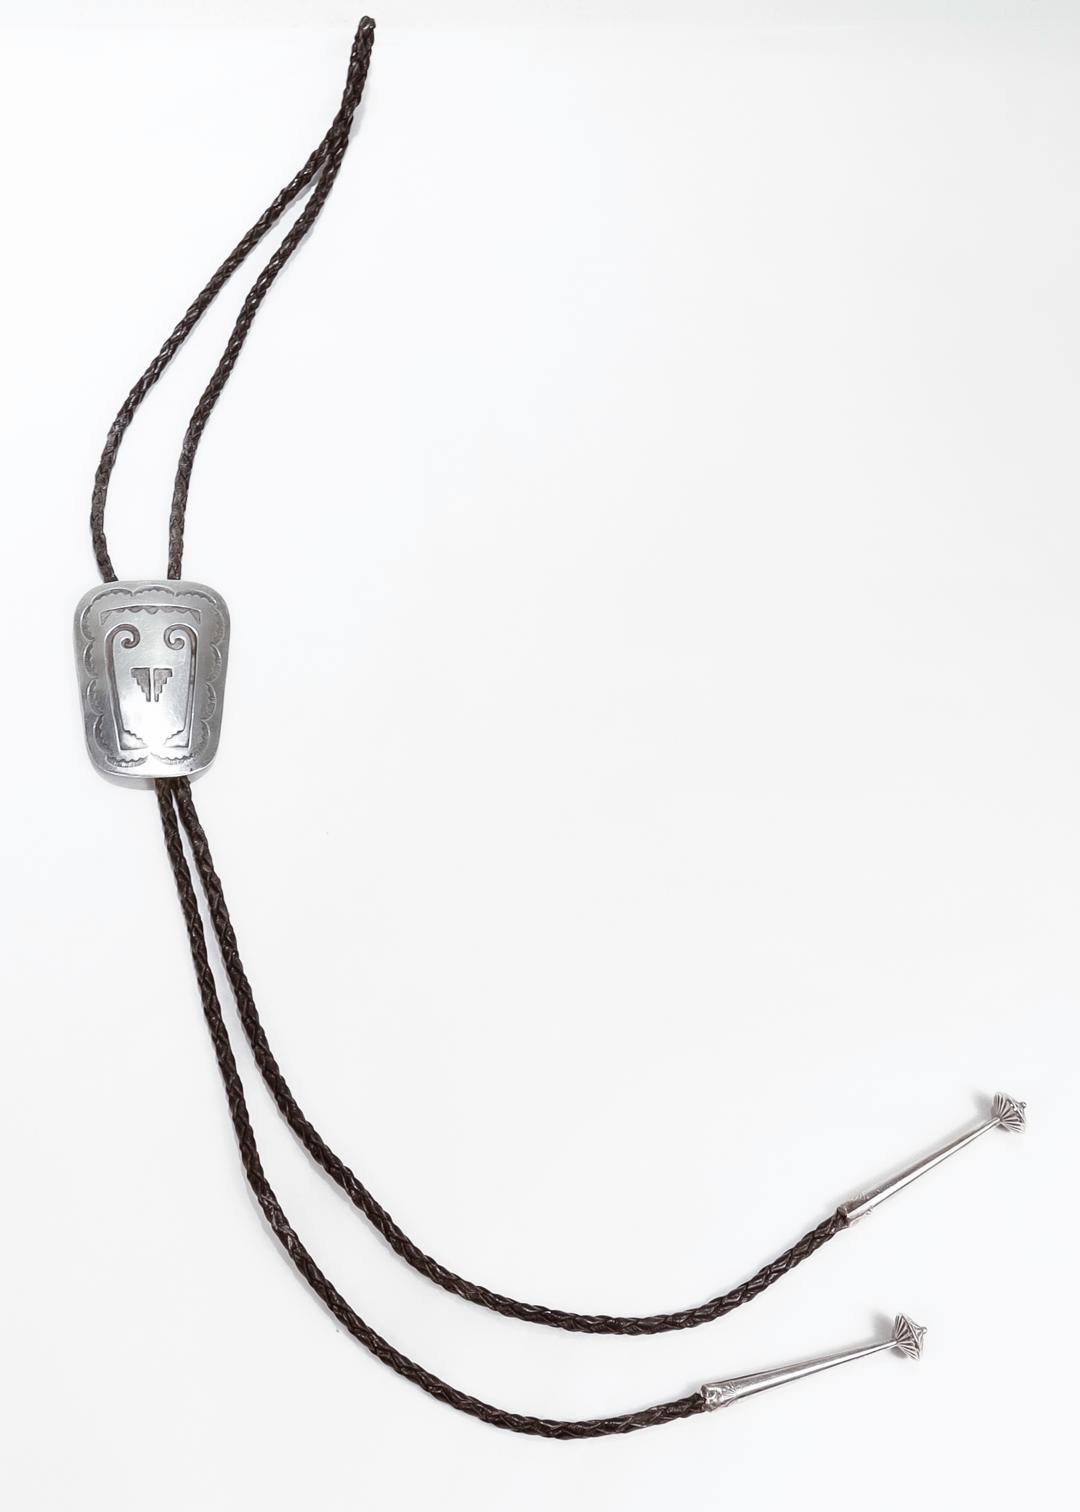 Signed Southwestern Silver & Leather Bolo Tie In Good Condition For Sale In Philadelphia, PA